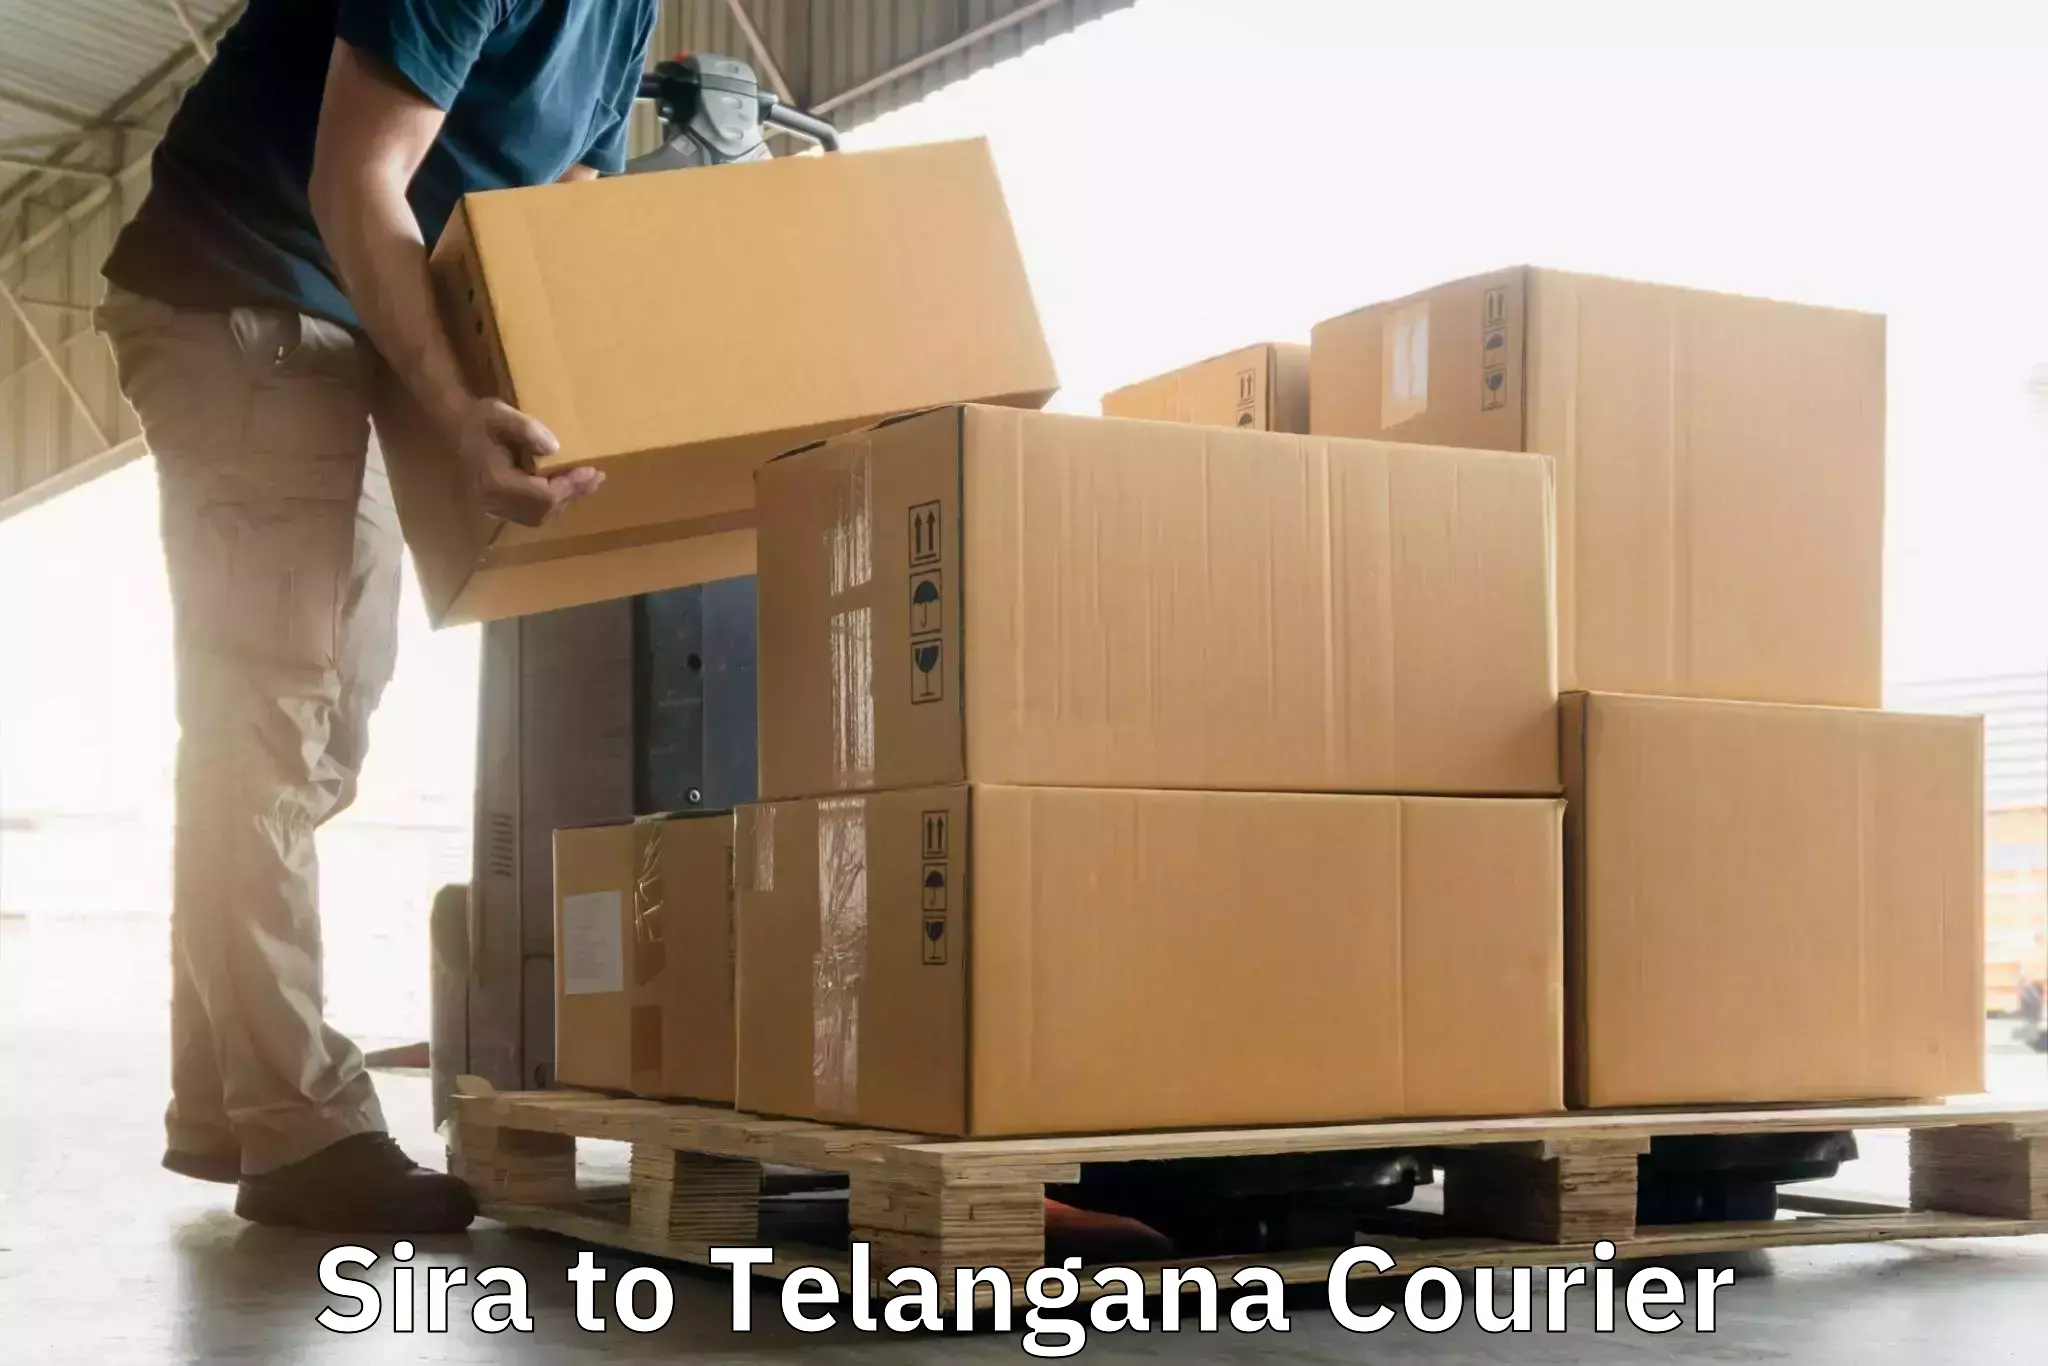 Express delivery network Sira to Metpally